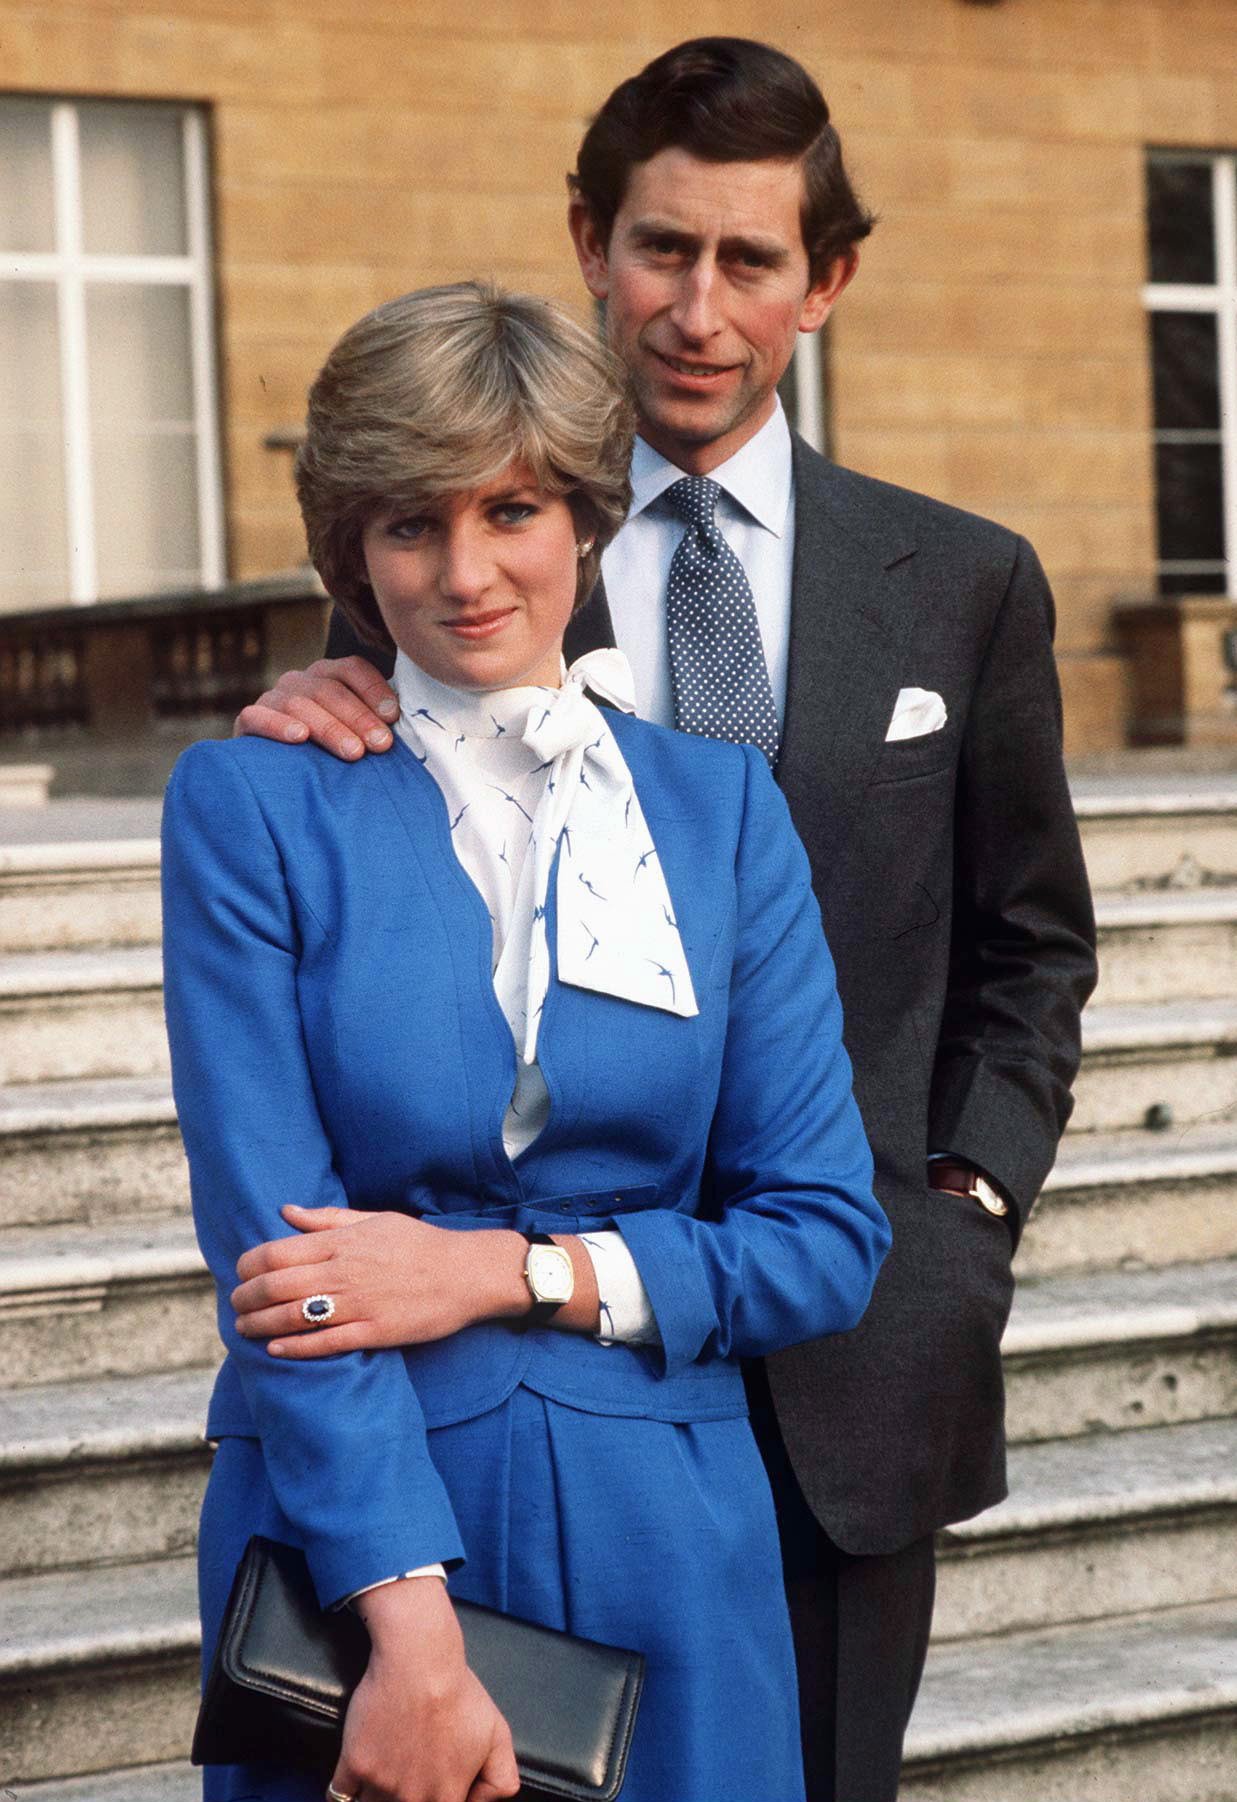 Lady Diana Spencer and Prince Charles pose during their engagement announcement day on February 24, 1981. | Source: Getty Images